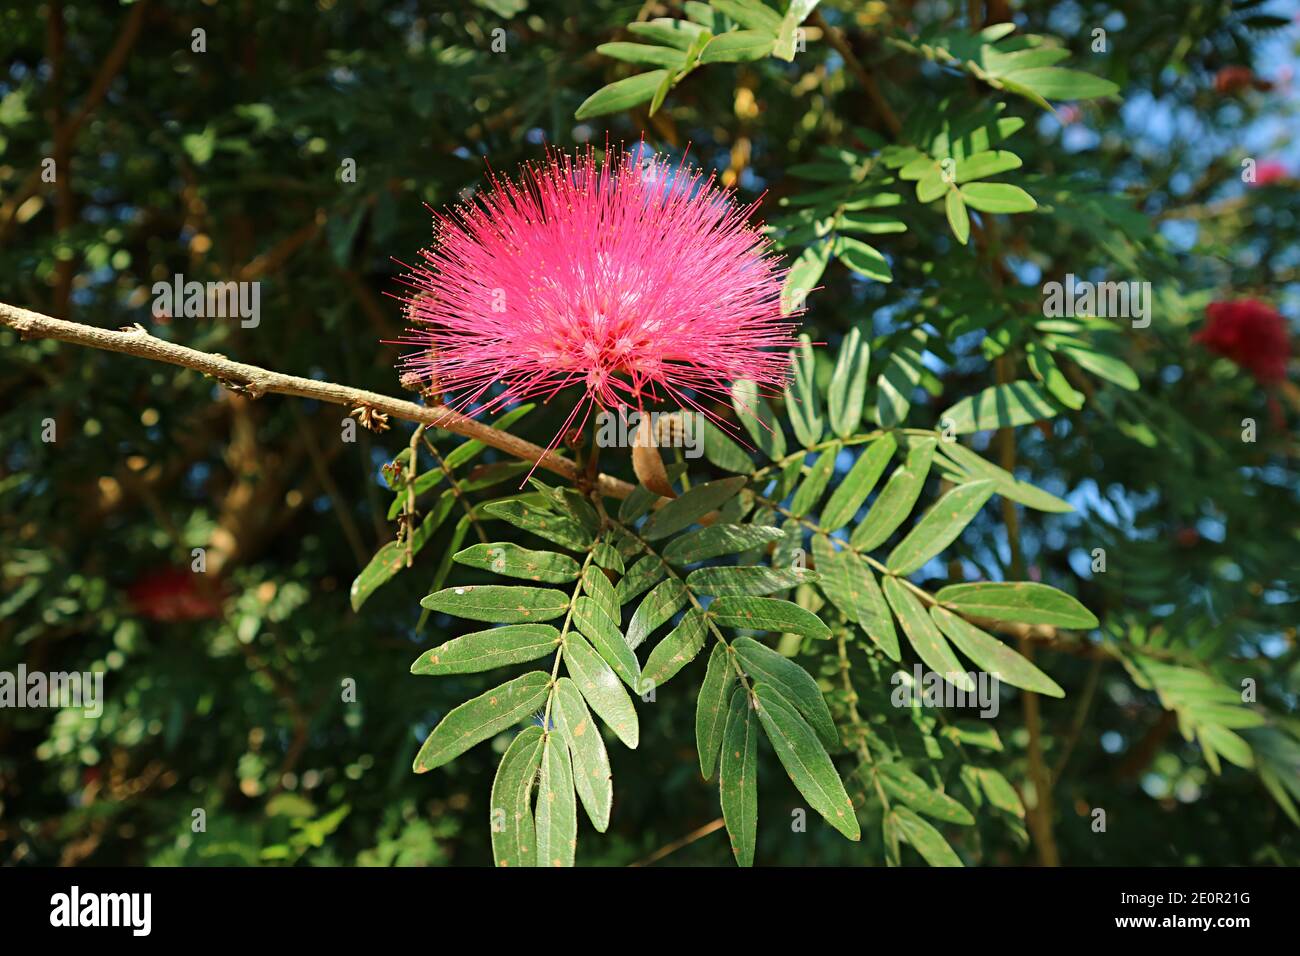 Closeup a Gorgeous Hot Pink Blooming Persian Silk Flower or Albizia Julibrissin on the Tree Stock Photo